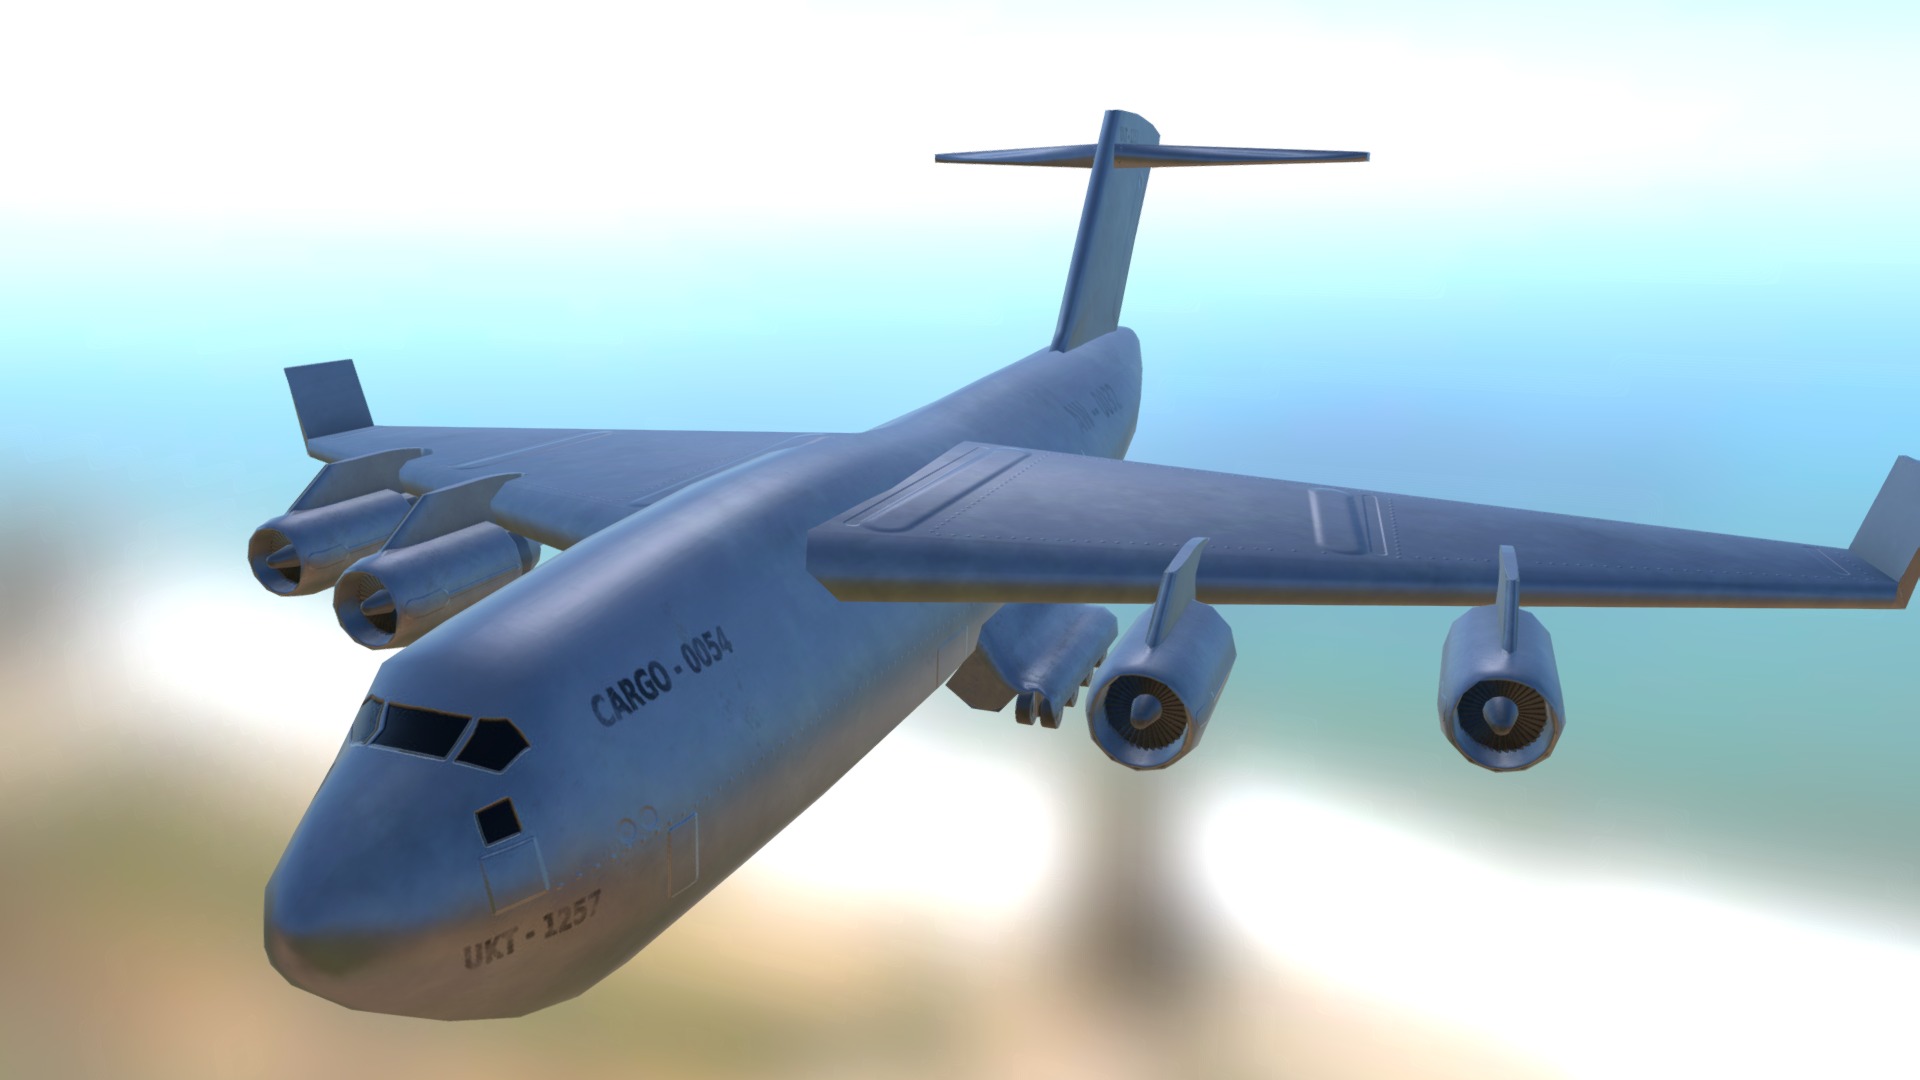 3D model Cargo Plane - This is a 3D model of the Cargo Plane. The 3D model is about a large airplane flying in the sky.